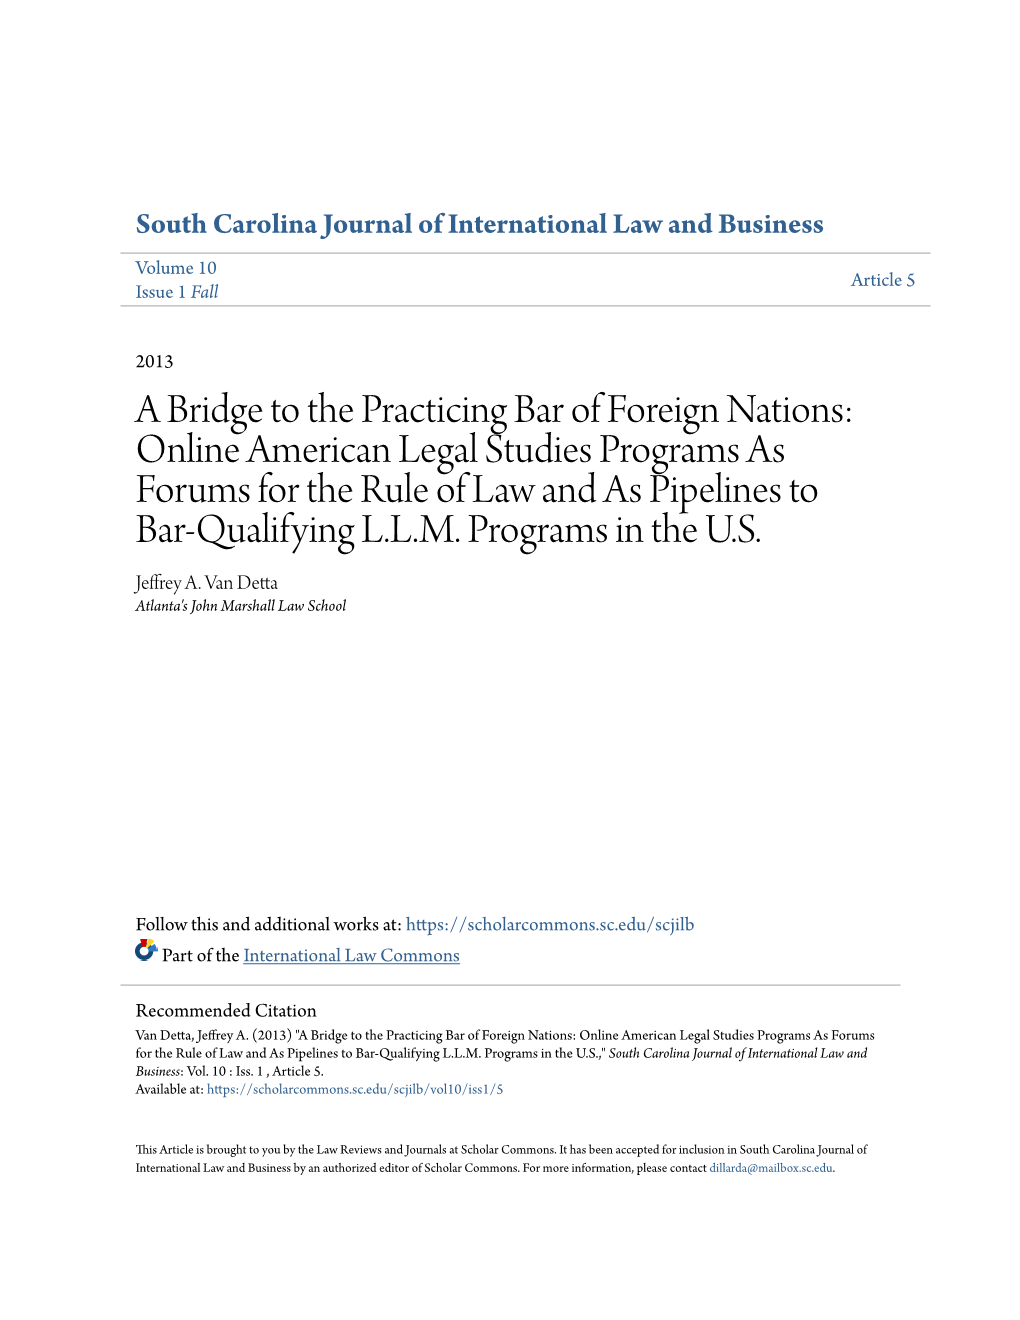 A Bridge to the Practicing Bar of Foreign Nations: Online American Legal Studies Programs As Forums for the Rule of Law and As Pipelines to Bar-Qualifying L.L.M